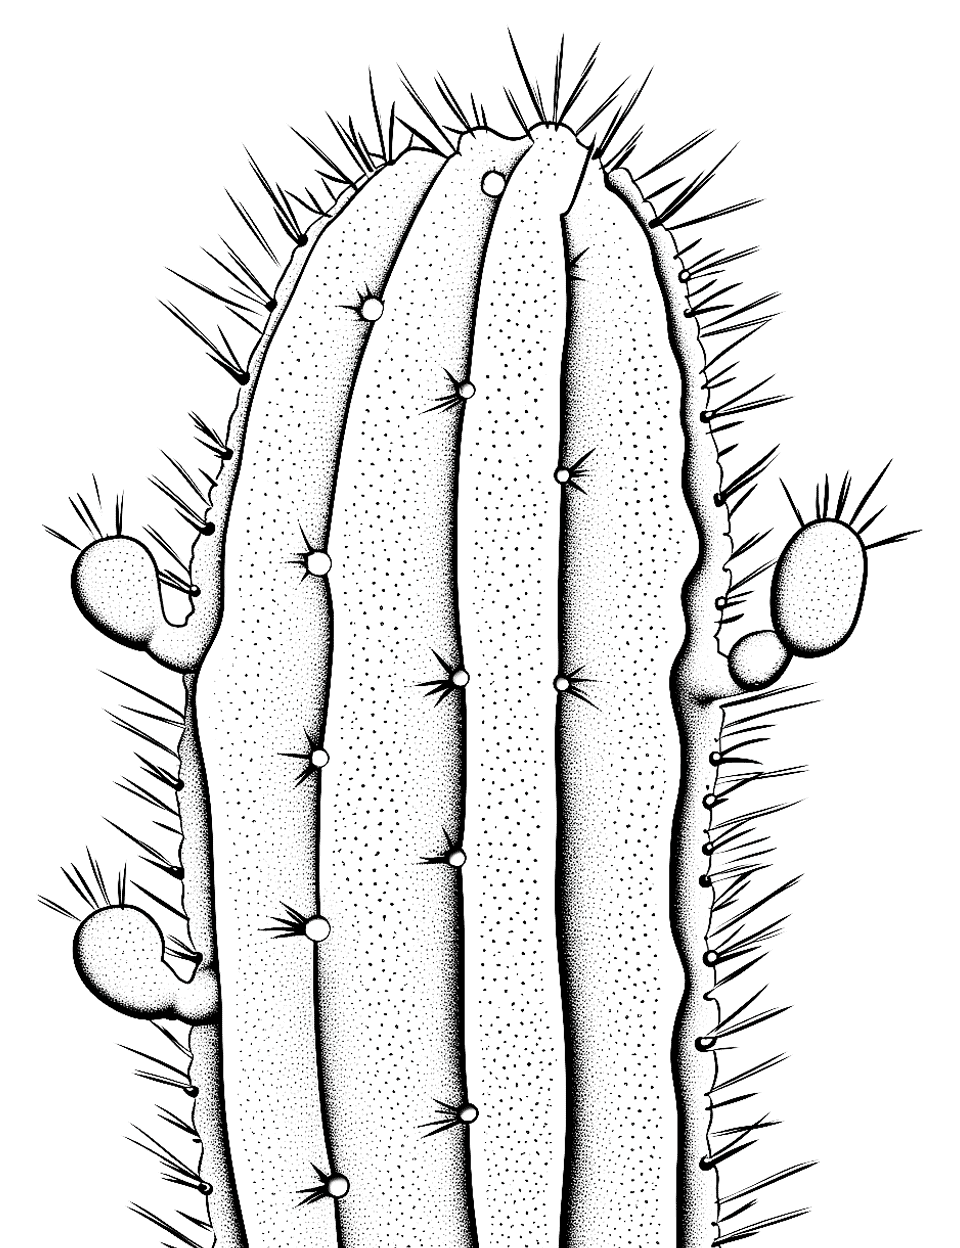 Realistic Cactus Close-Up Coloring Page - A detailed, lifelike drawing of a cactus, focusing on its spikes and texture.